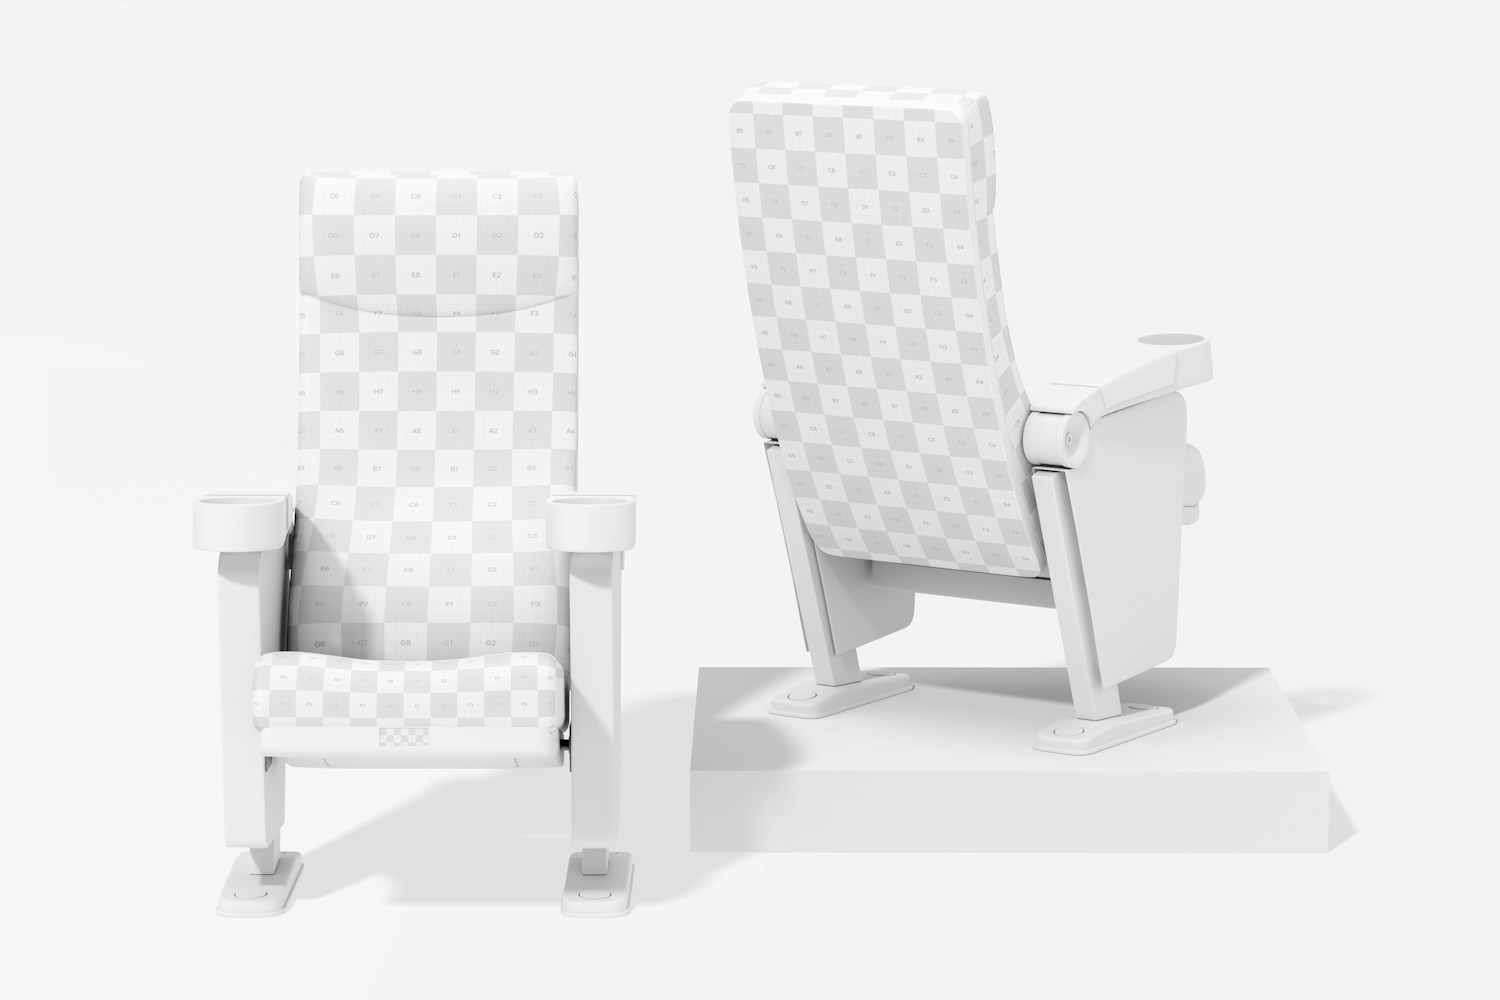 Cinema Chairs Mockup, Front and Back View